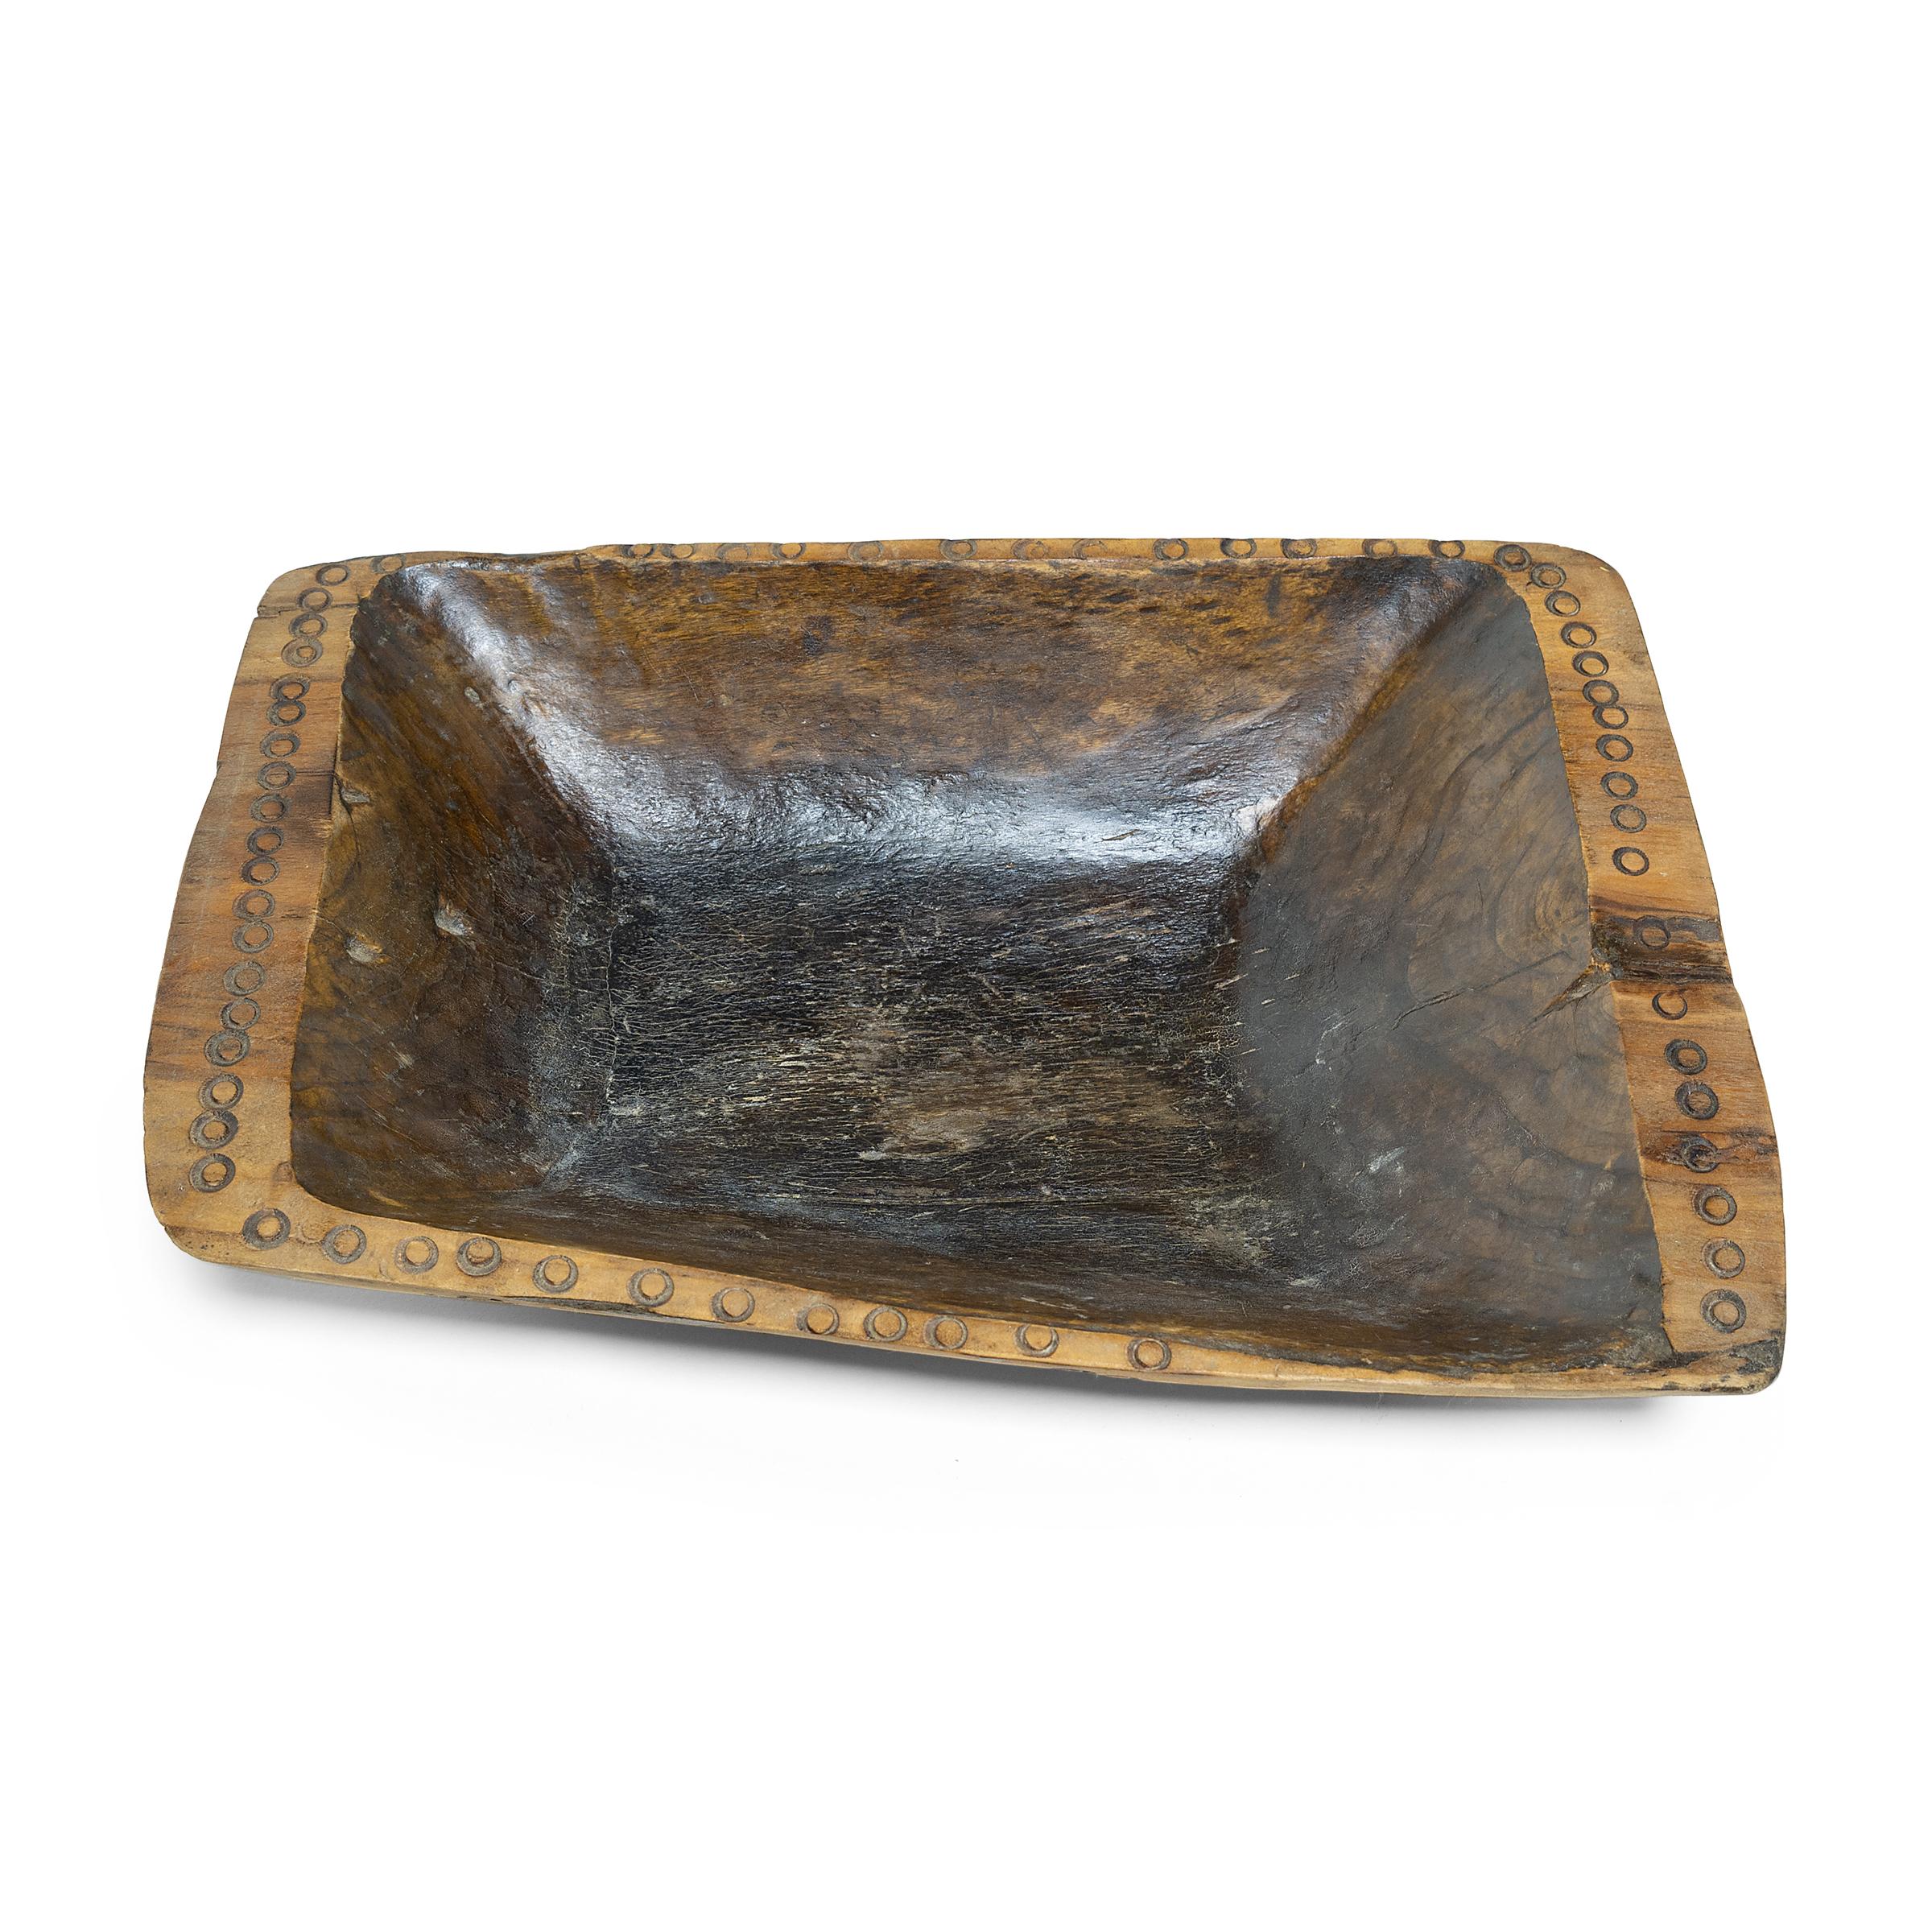 Rustic Provincial Chinese Farm Tray, c. 1900